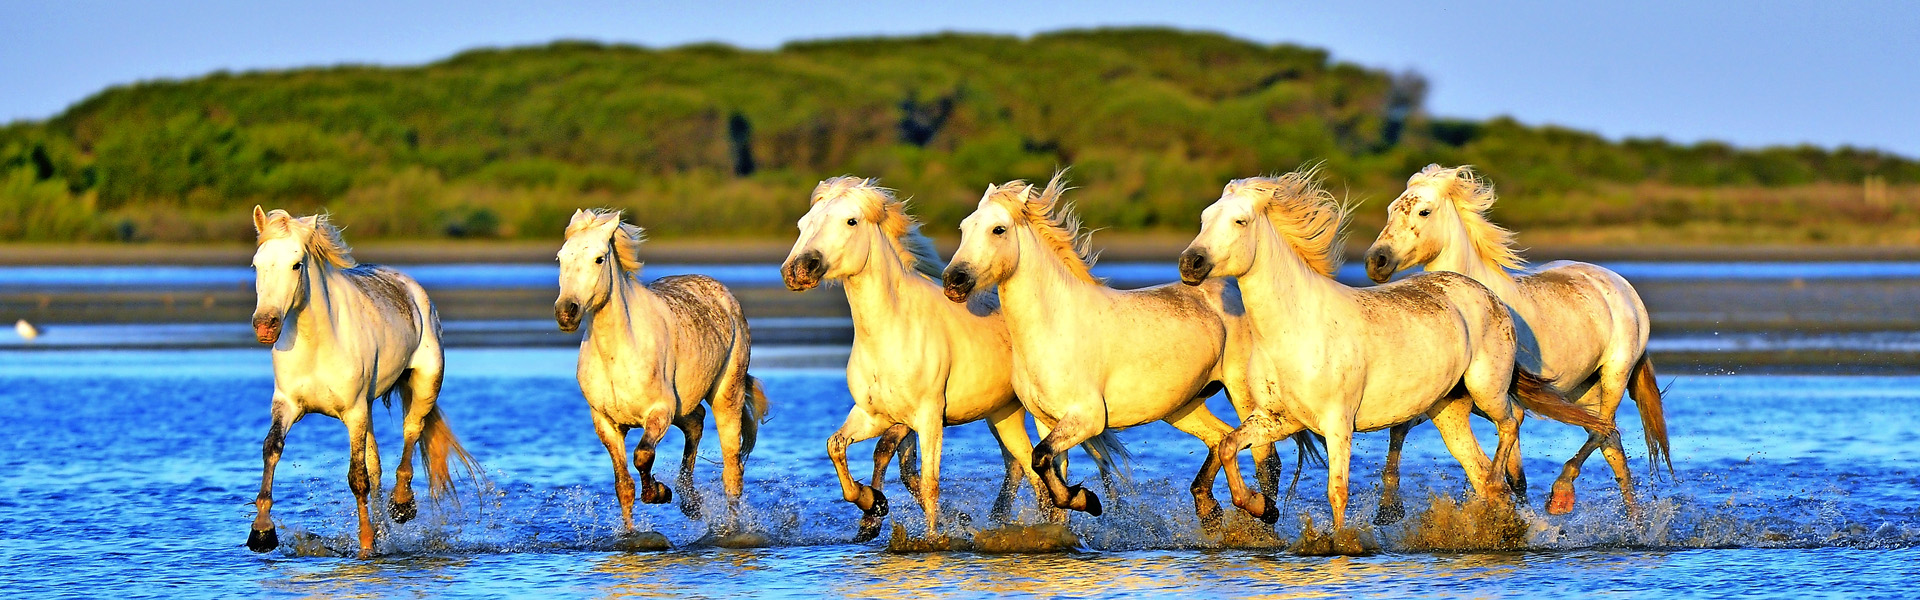 Herd of White Camargue horses run on water of the sea. France.